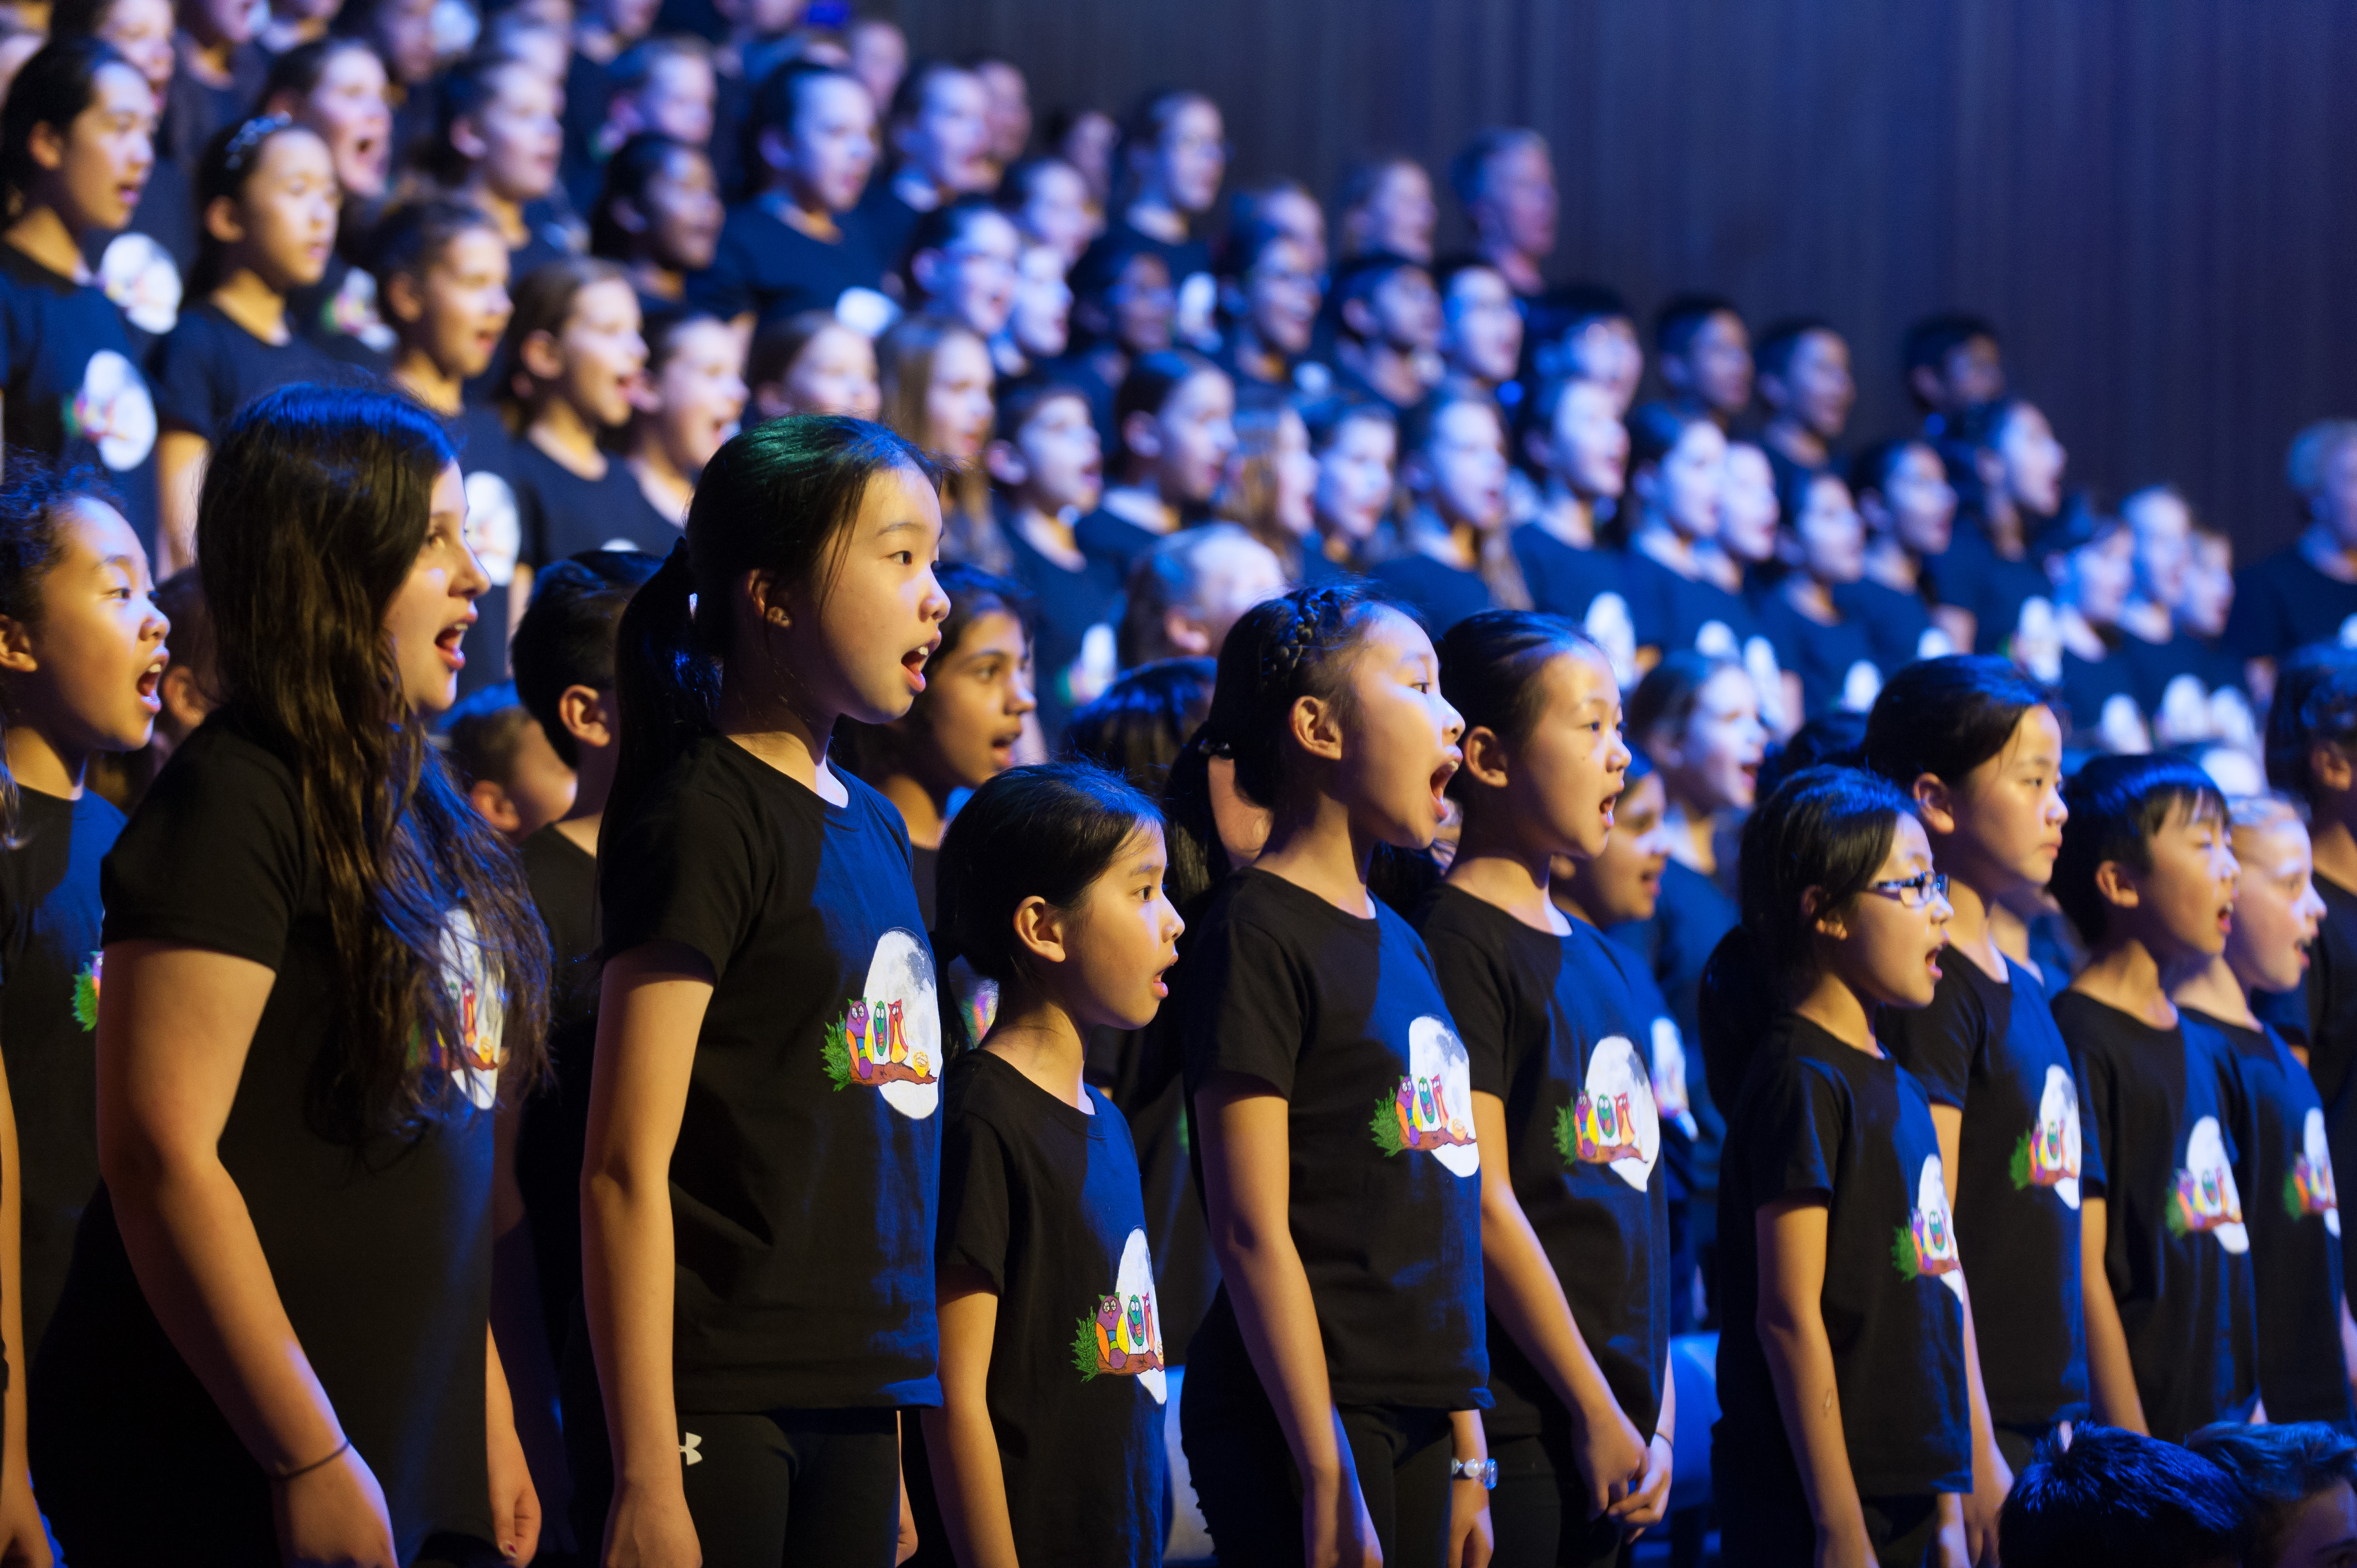 Students singing in the FoCM Combined Choir 2015, photography by Andrew Lasky